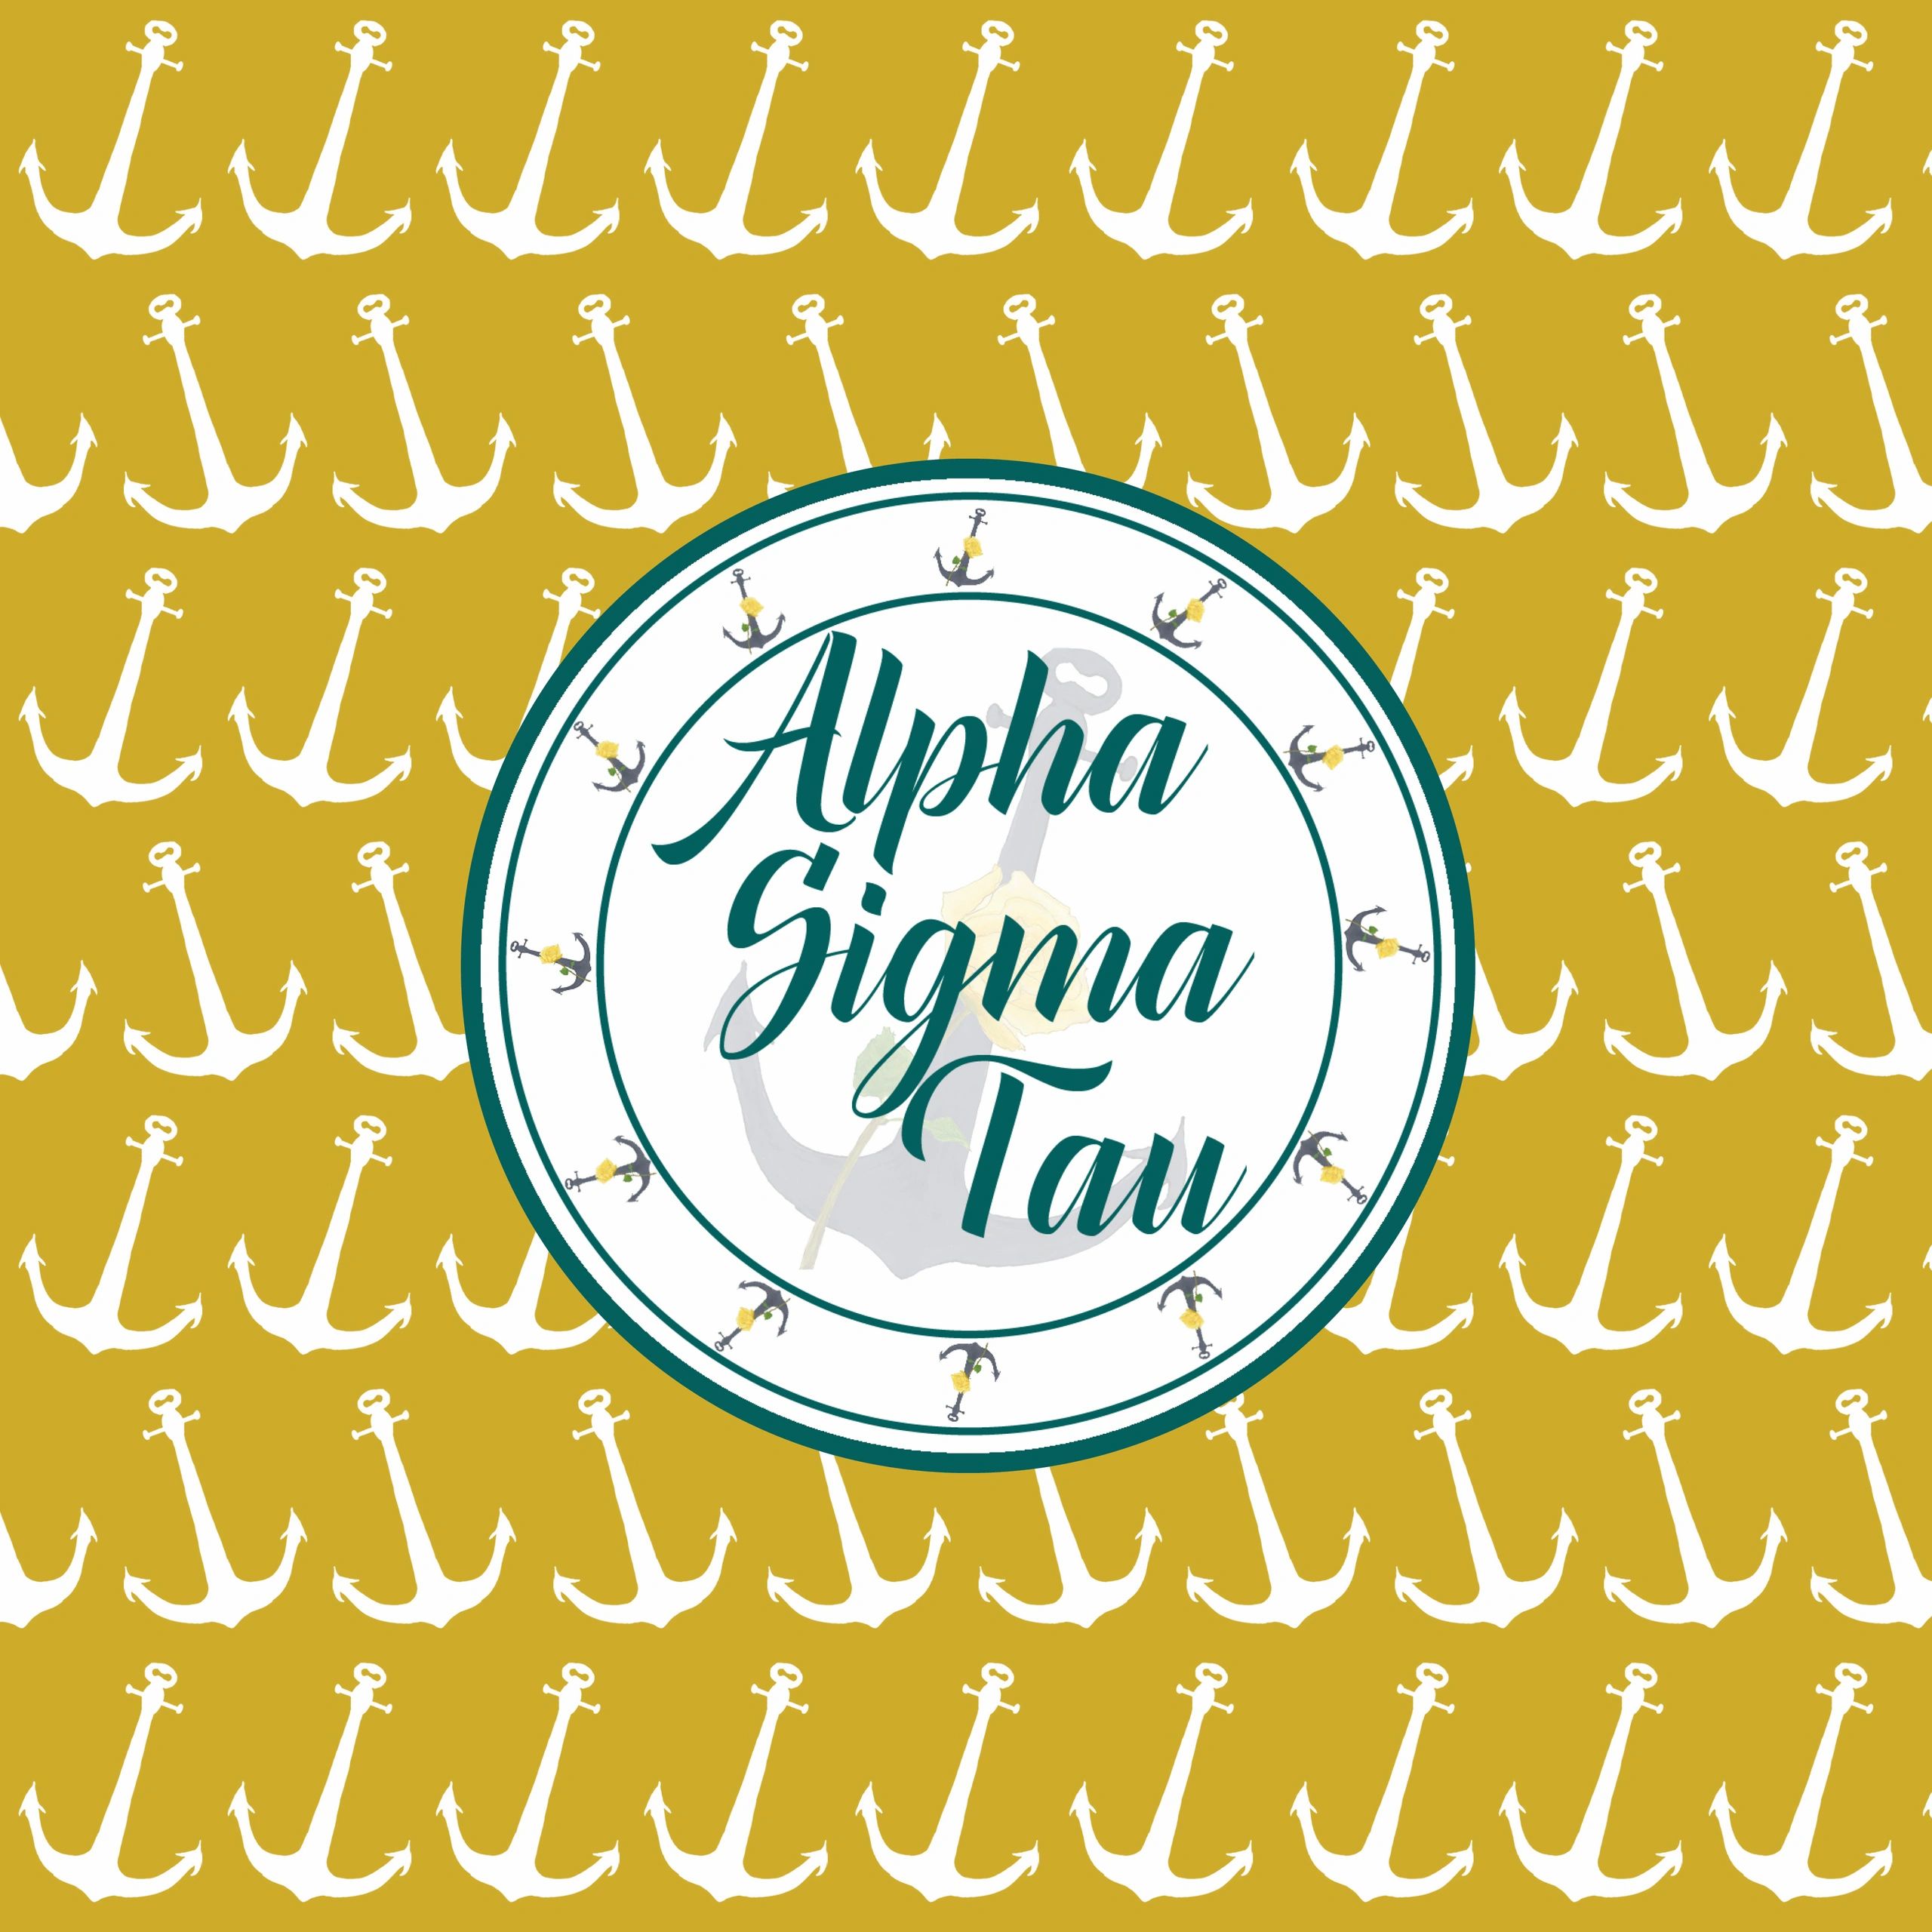 SIUE Alpha Sigma Tau - happy st. patrick's day! 🍀🤍 tag a sister that  you're lucky to have found through AST🤞🏻✨